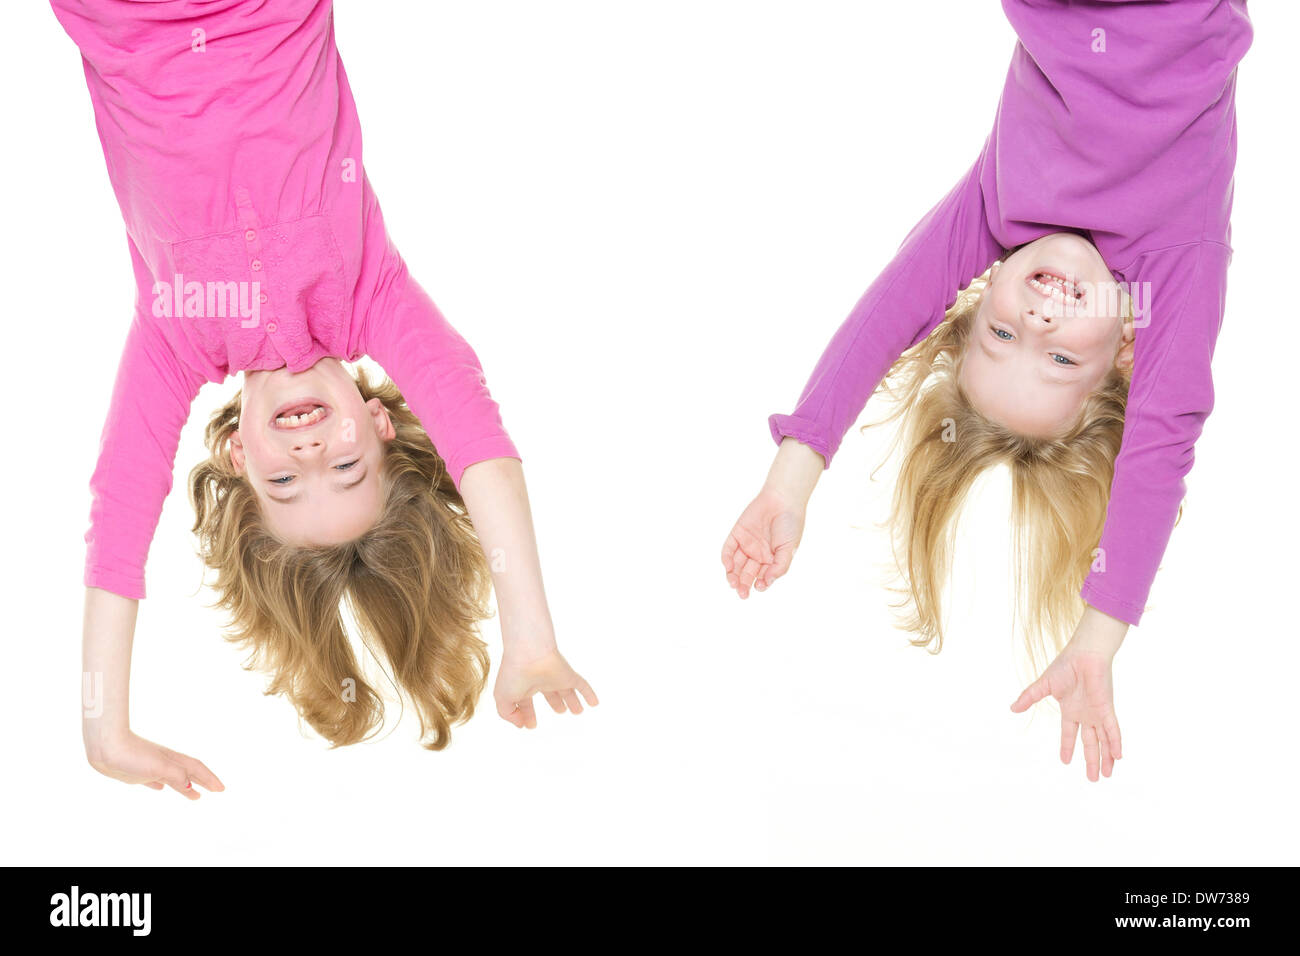 Smiling young girls hanging in front of white background Banque D'Images